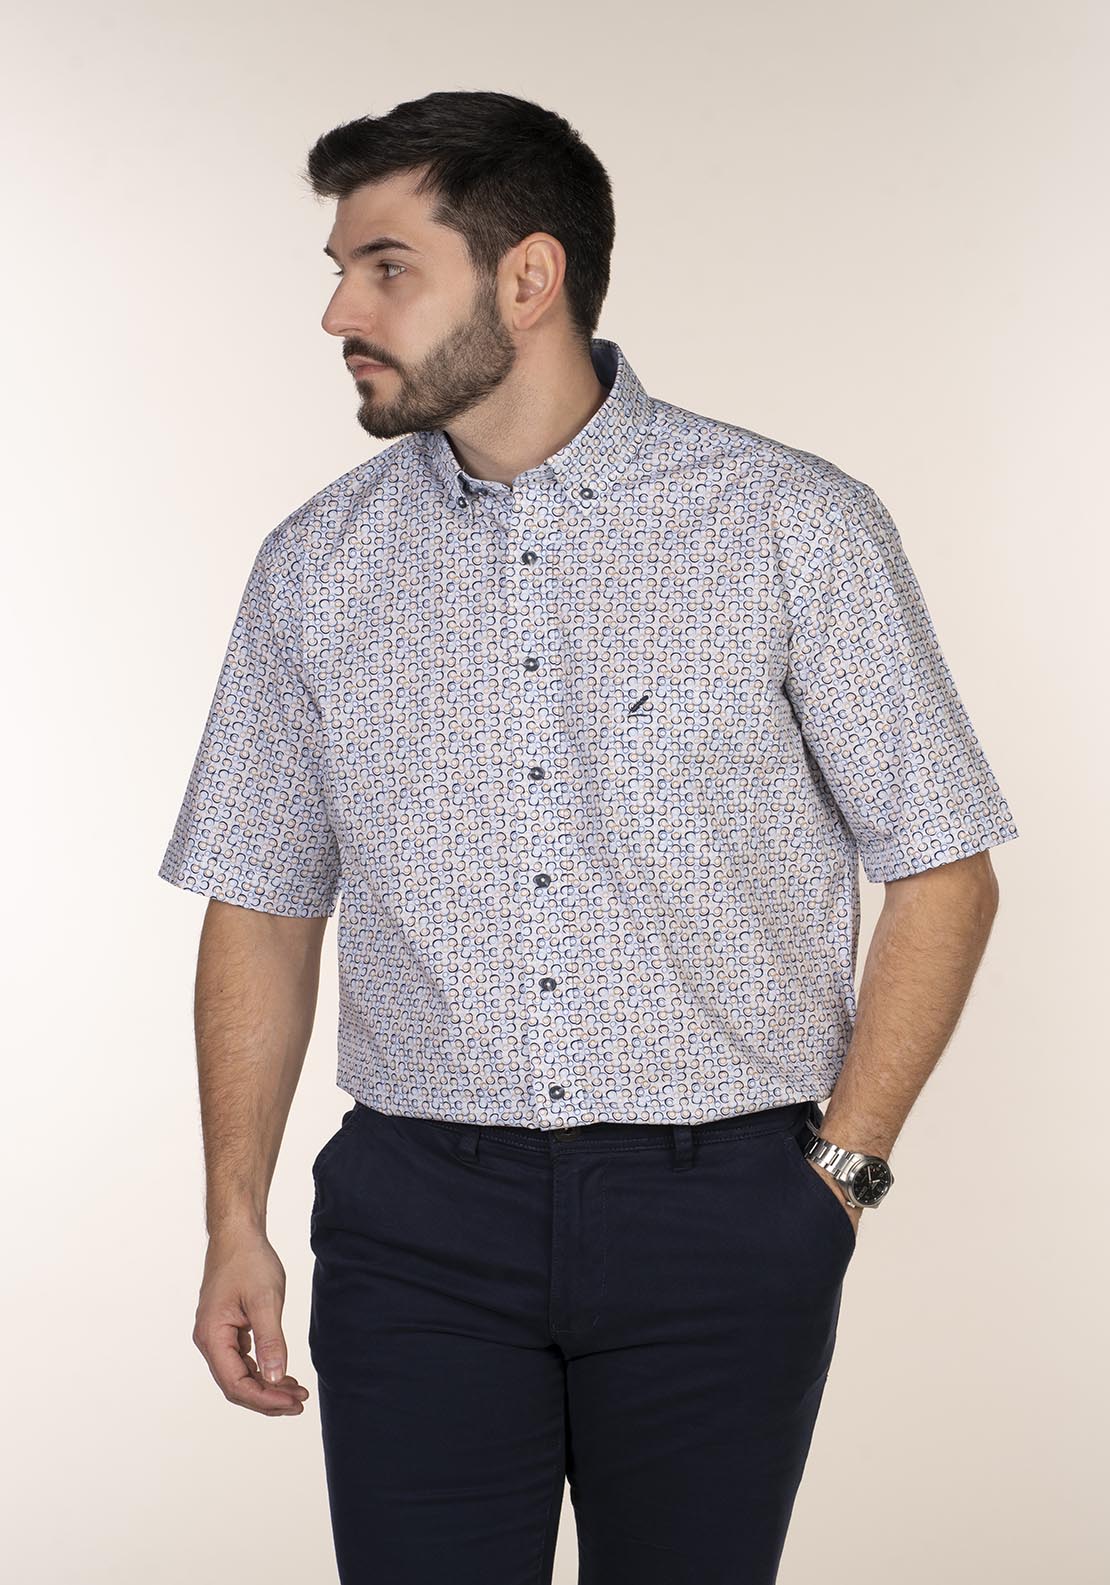 Yeats Casual Patterned Short Sleeve Shirt - Blue / Beige 3 Shaws Department Stores